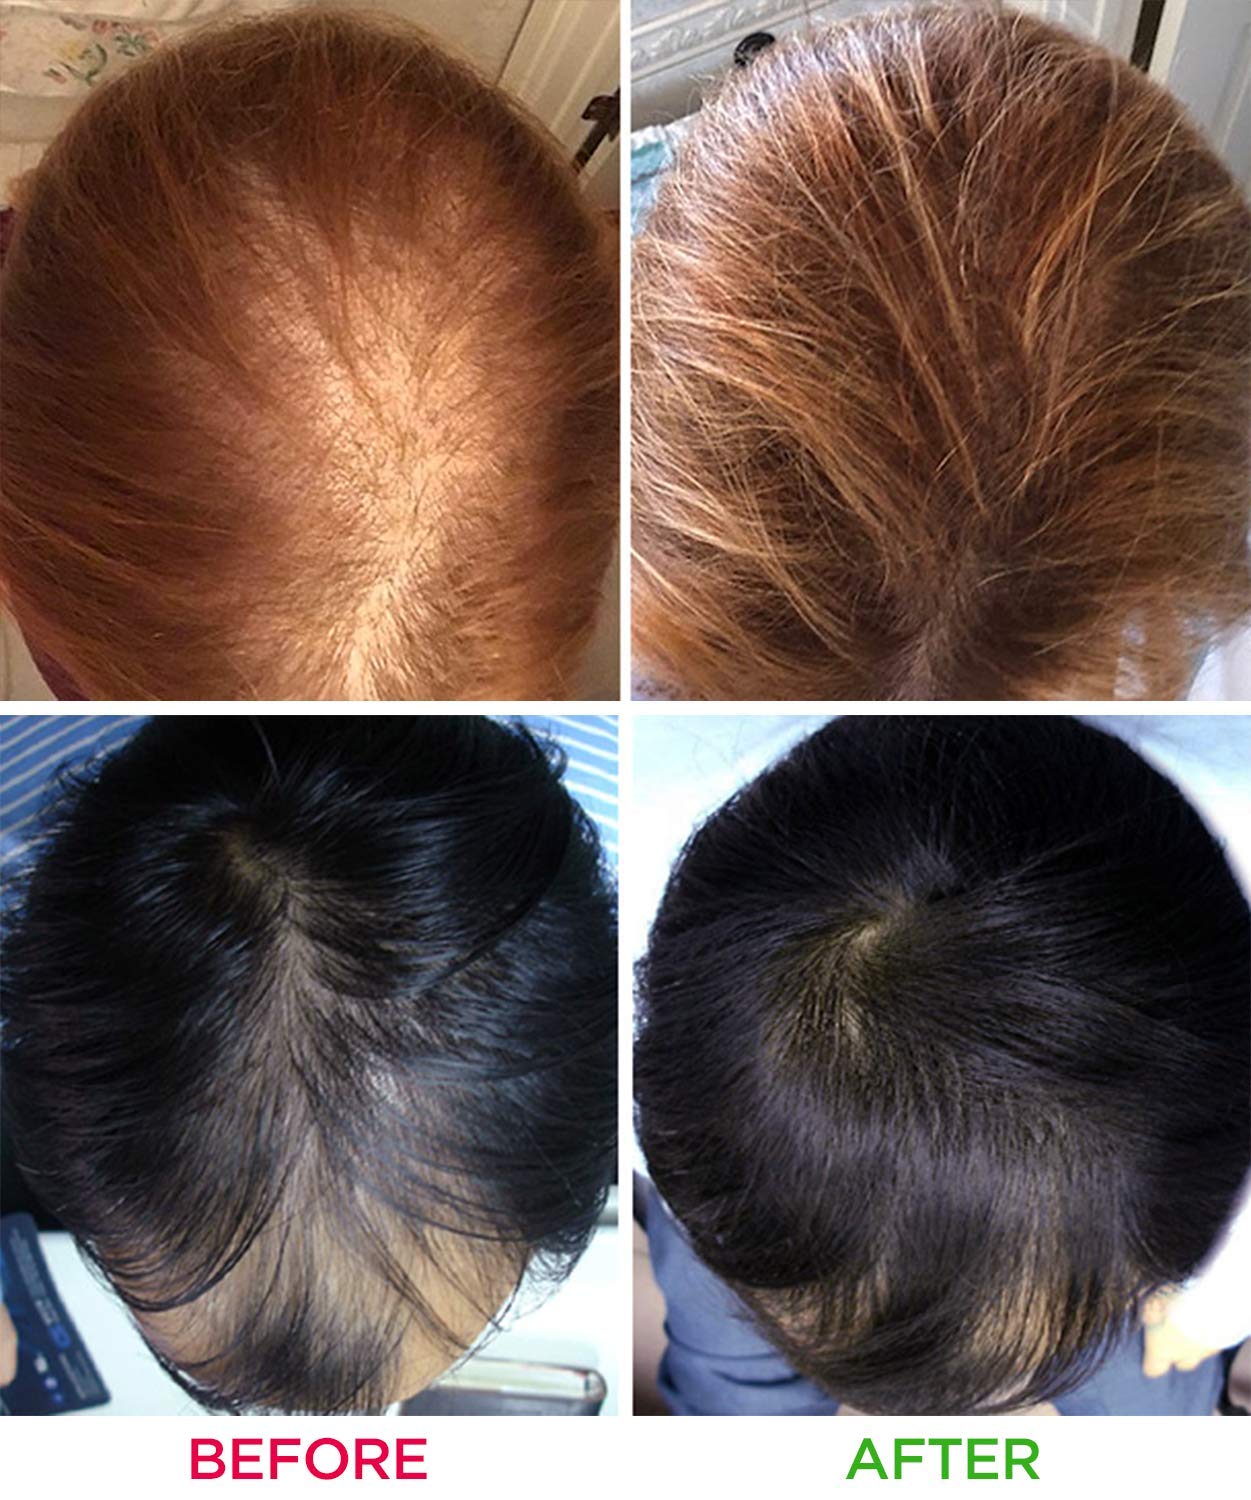 Female non surgical hair replacement before & after